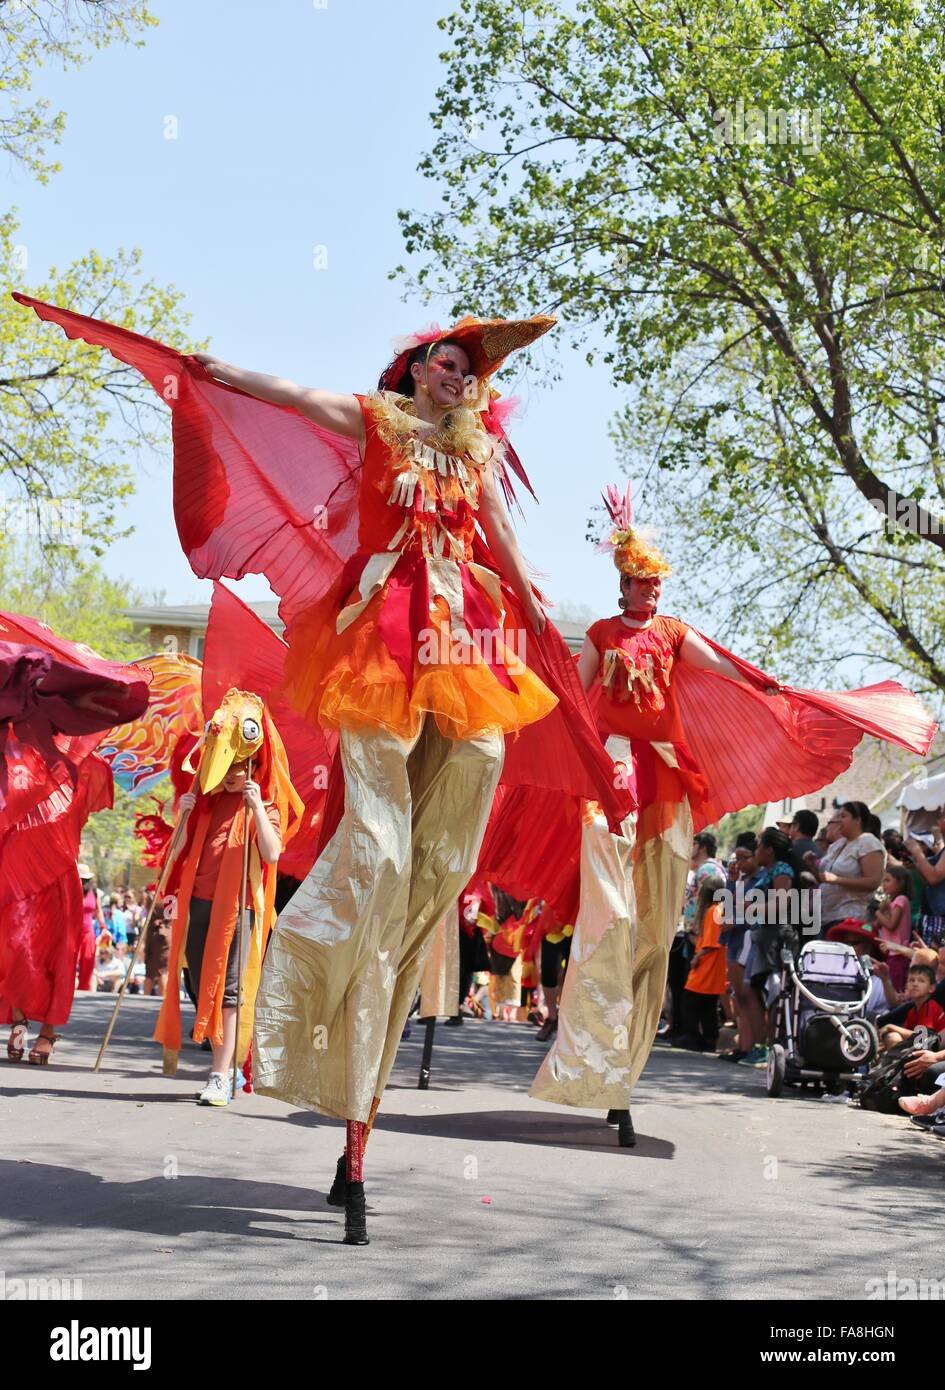 People in colorful costumes and on tall stilts at the May Day parade in Minneapolis, Minnesota. Stock Photo